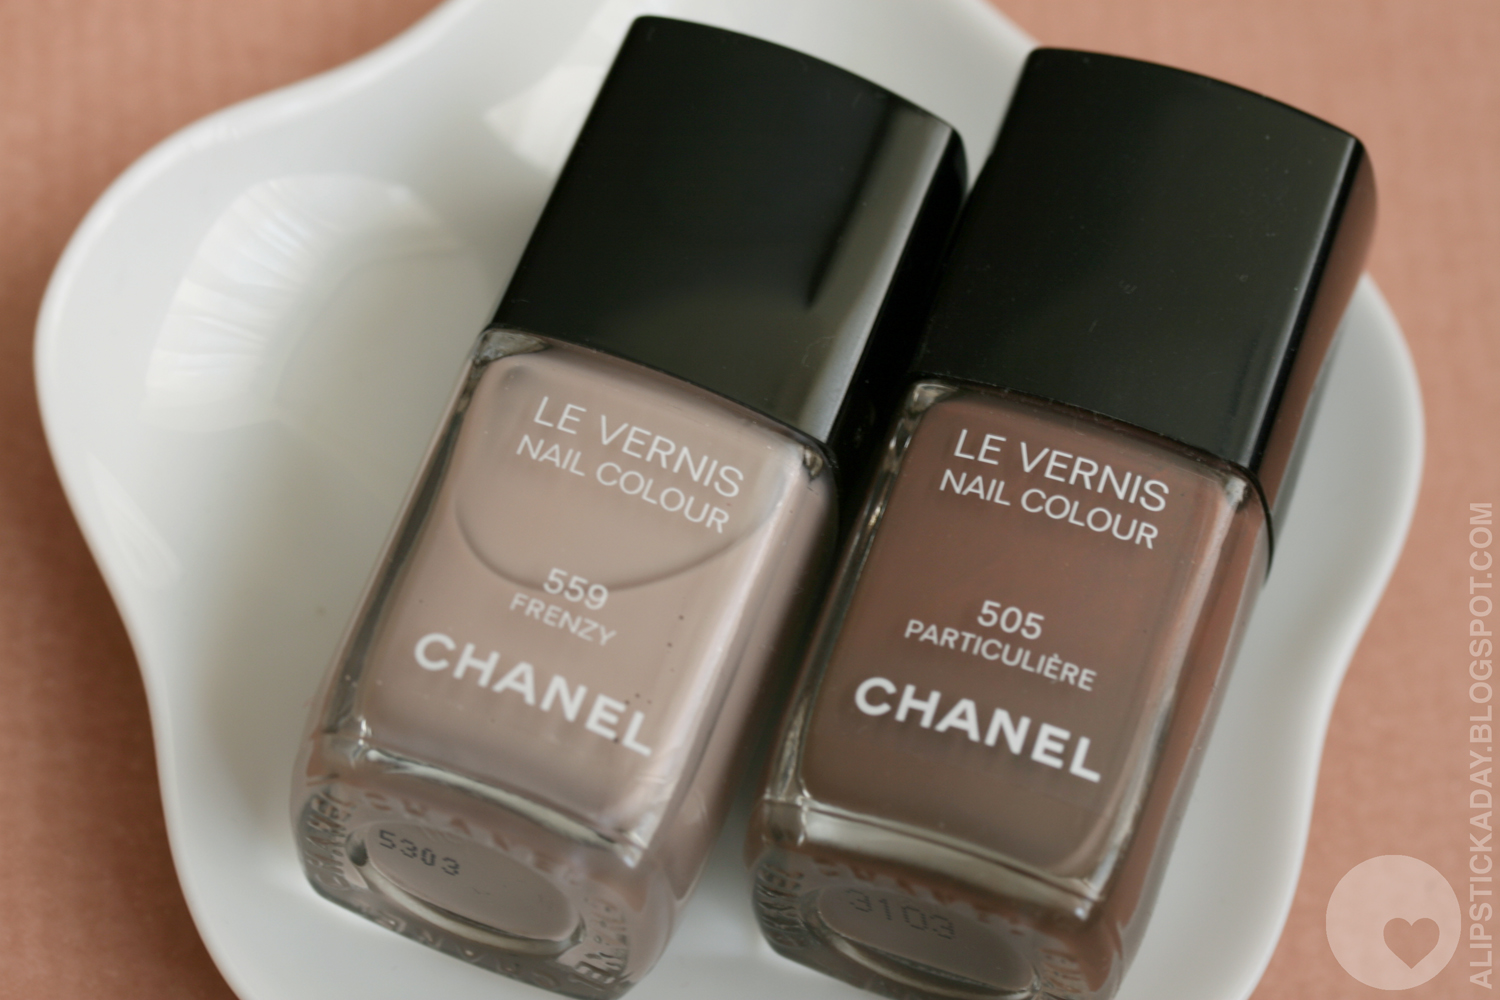 Chanel Le Vernis Longwear Nail Colour in Frenzy - wide 10